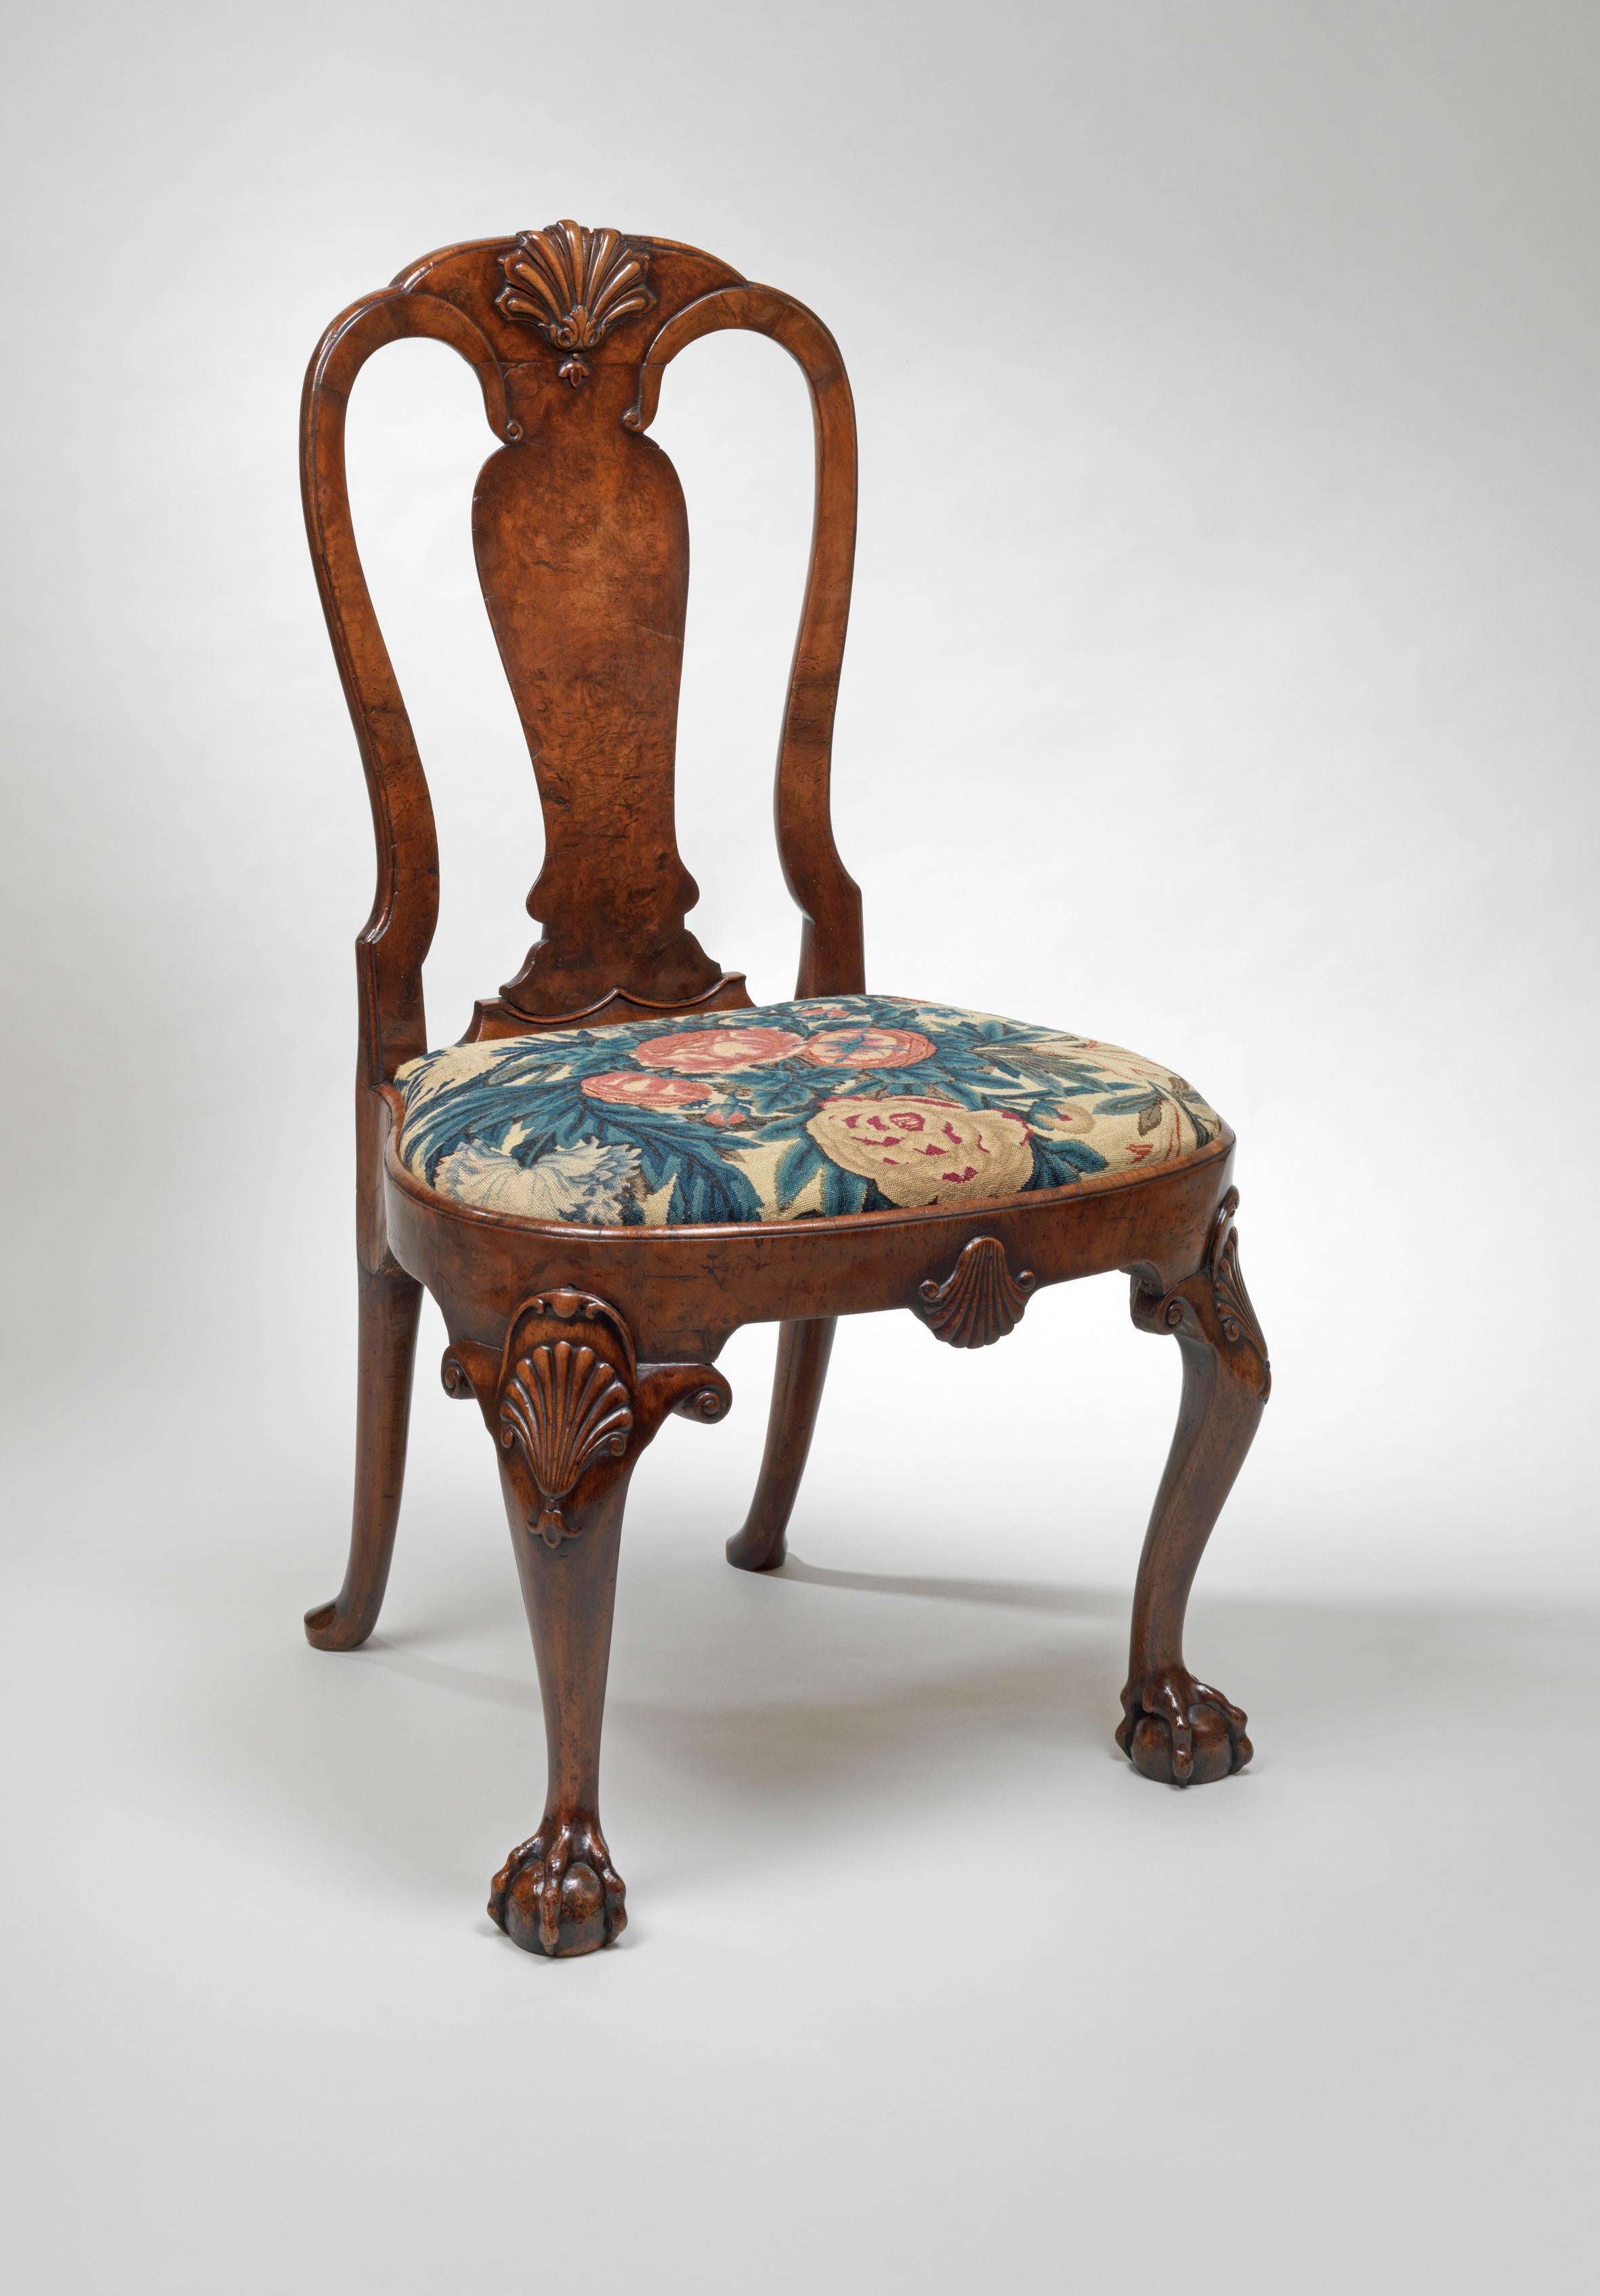 Each chair has a gently curving top rail carved with a central shell and foliage; the tops of the sinuous side rails curve round to join the top of the wide inverted baluster splat. The front rail of the seat is carved with a shell, as are the